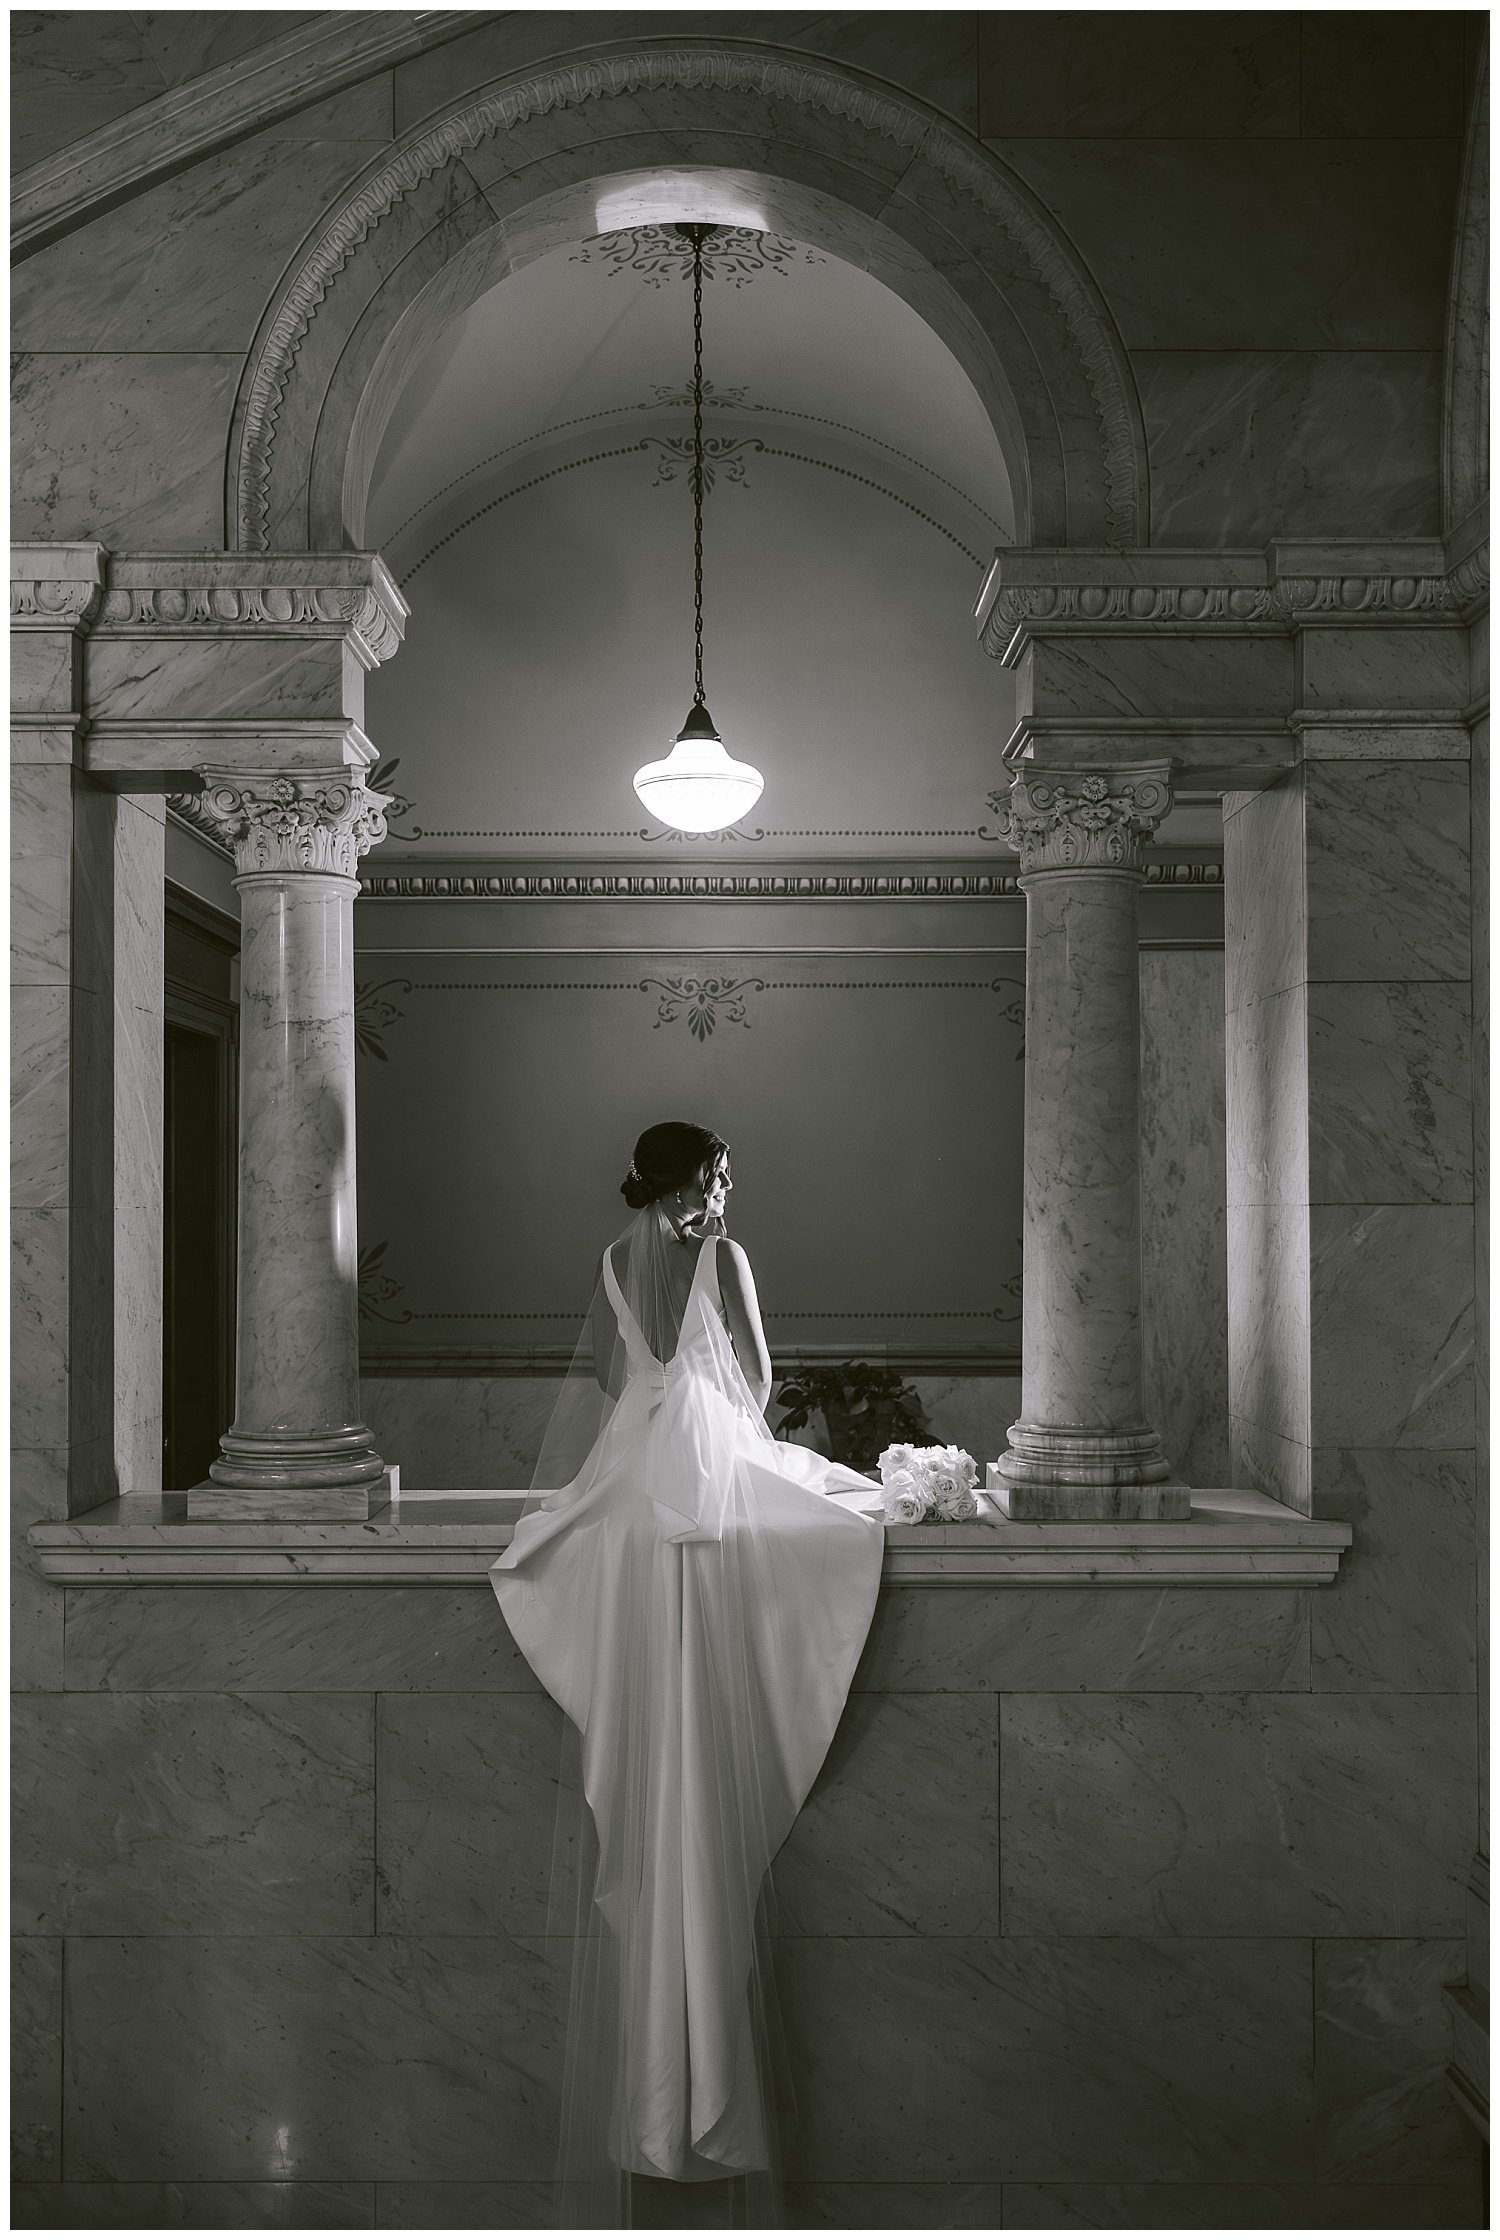 Black and white photo of a bride in dramatic lighting posing for wedding photos at the Ohio Statehouse